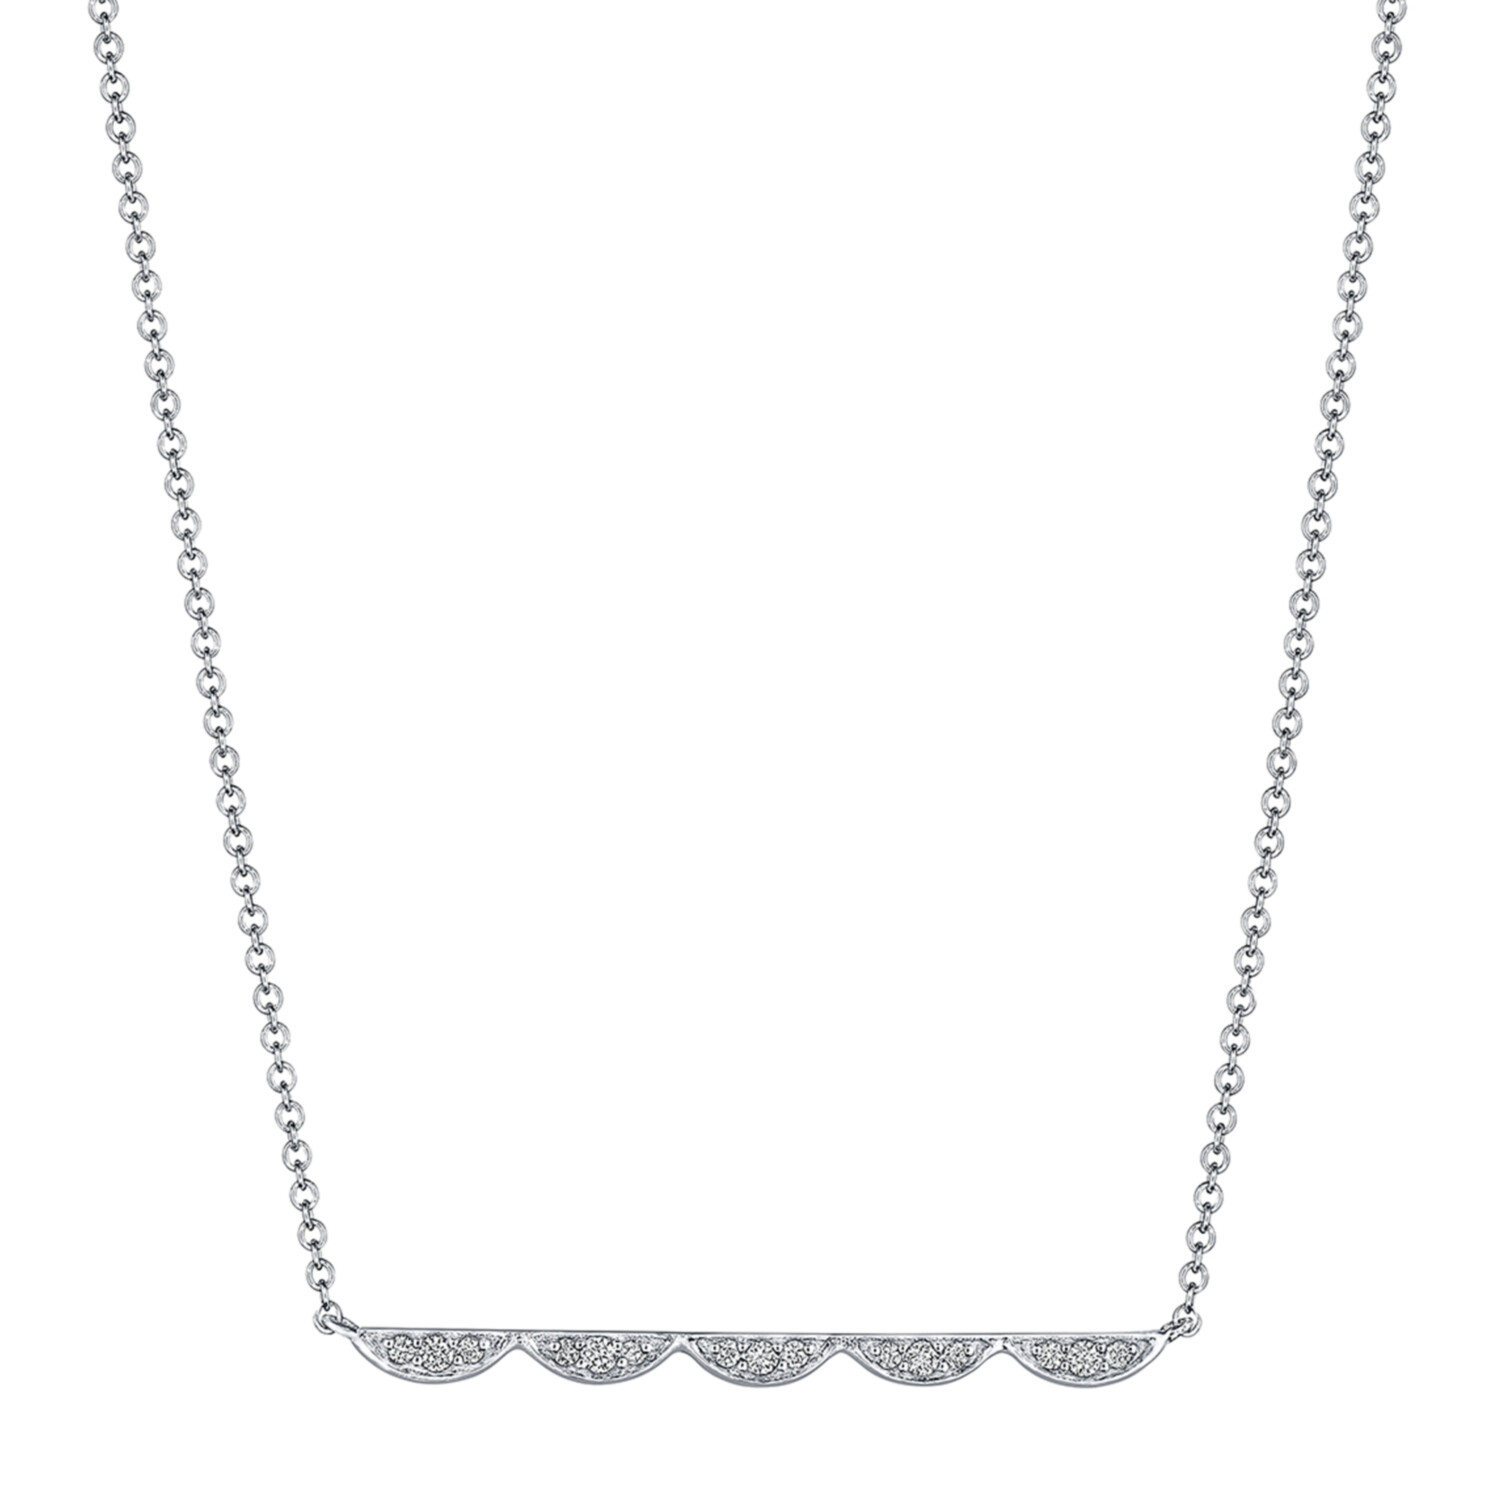 Necklace by Tacori